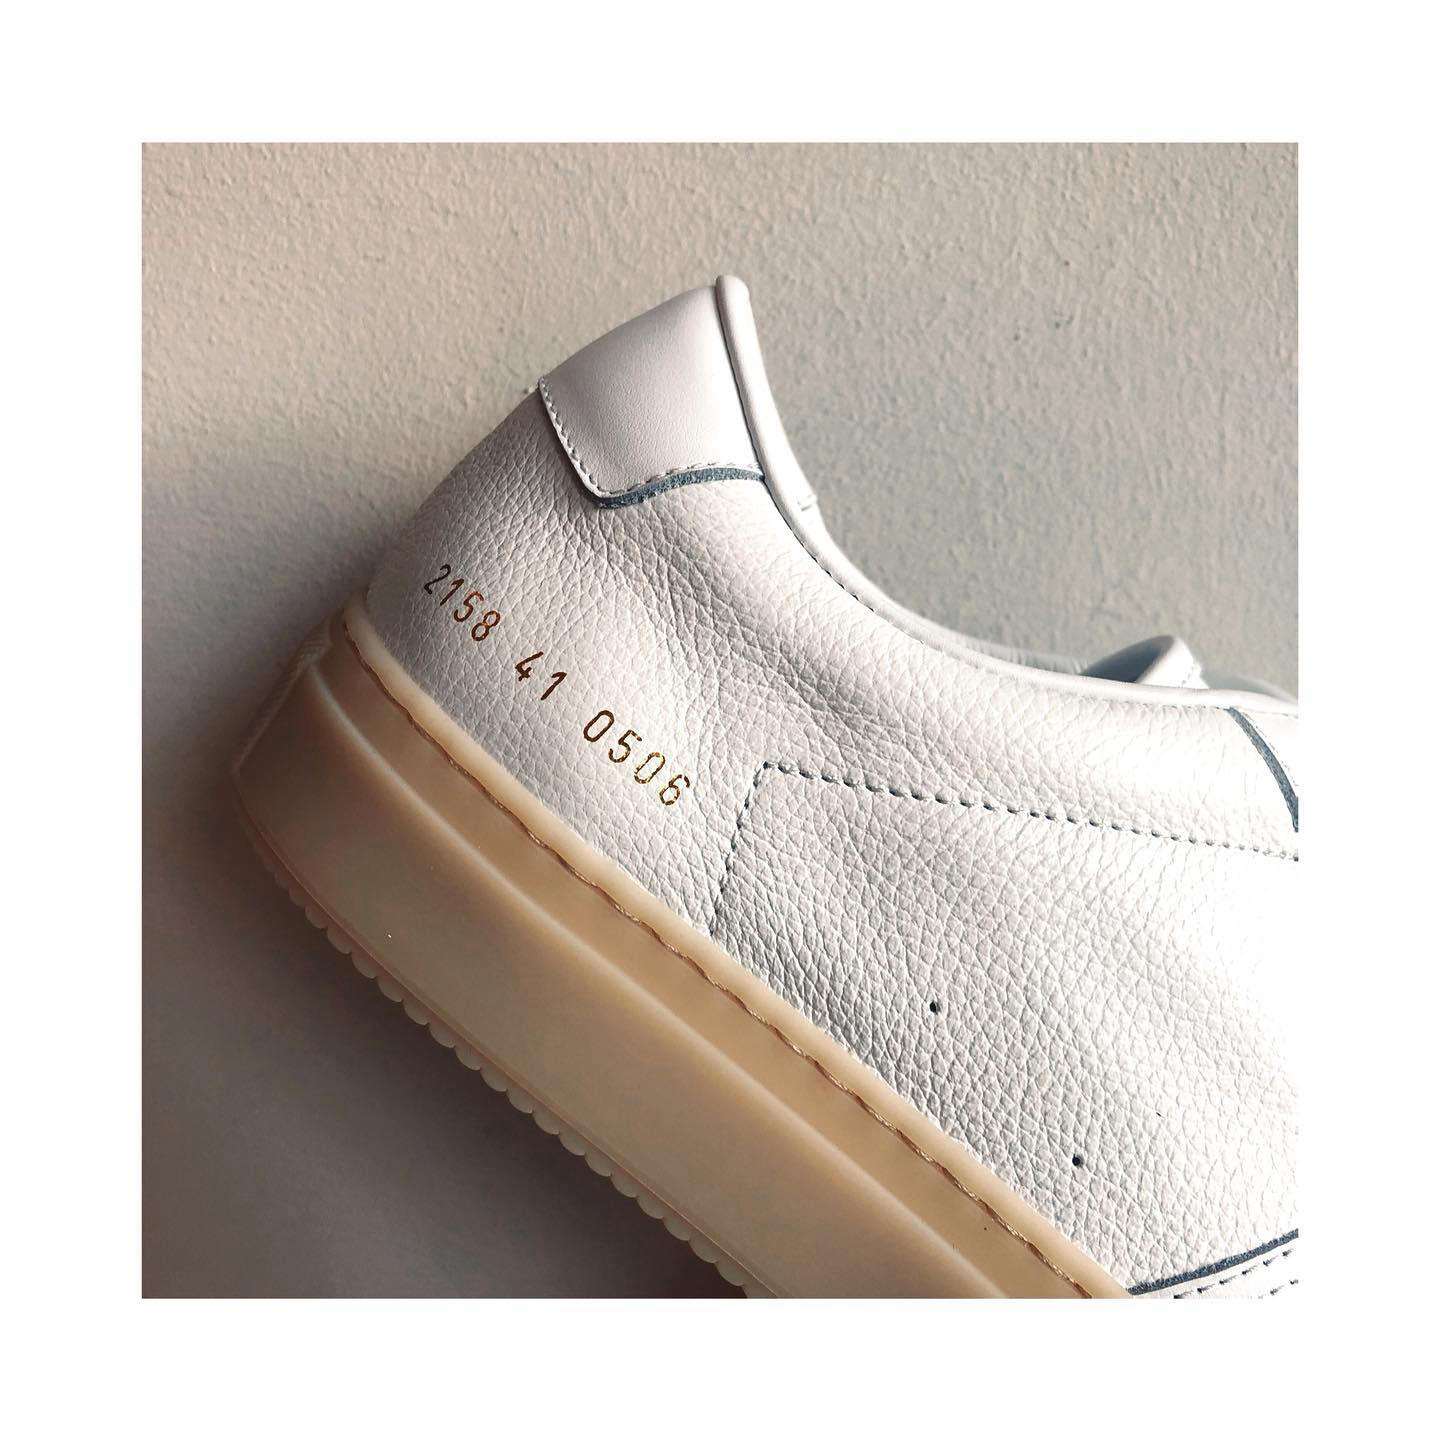 image  1 Pauw Mannen Luxury Denim - Common projects #pebble#mensfashion #BBALL #multi material white #2158 #c